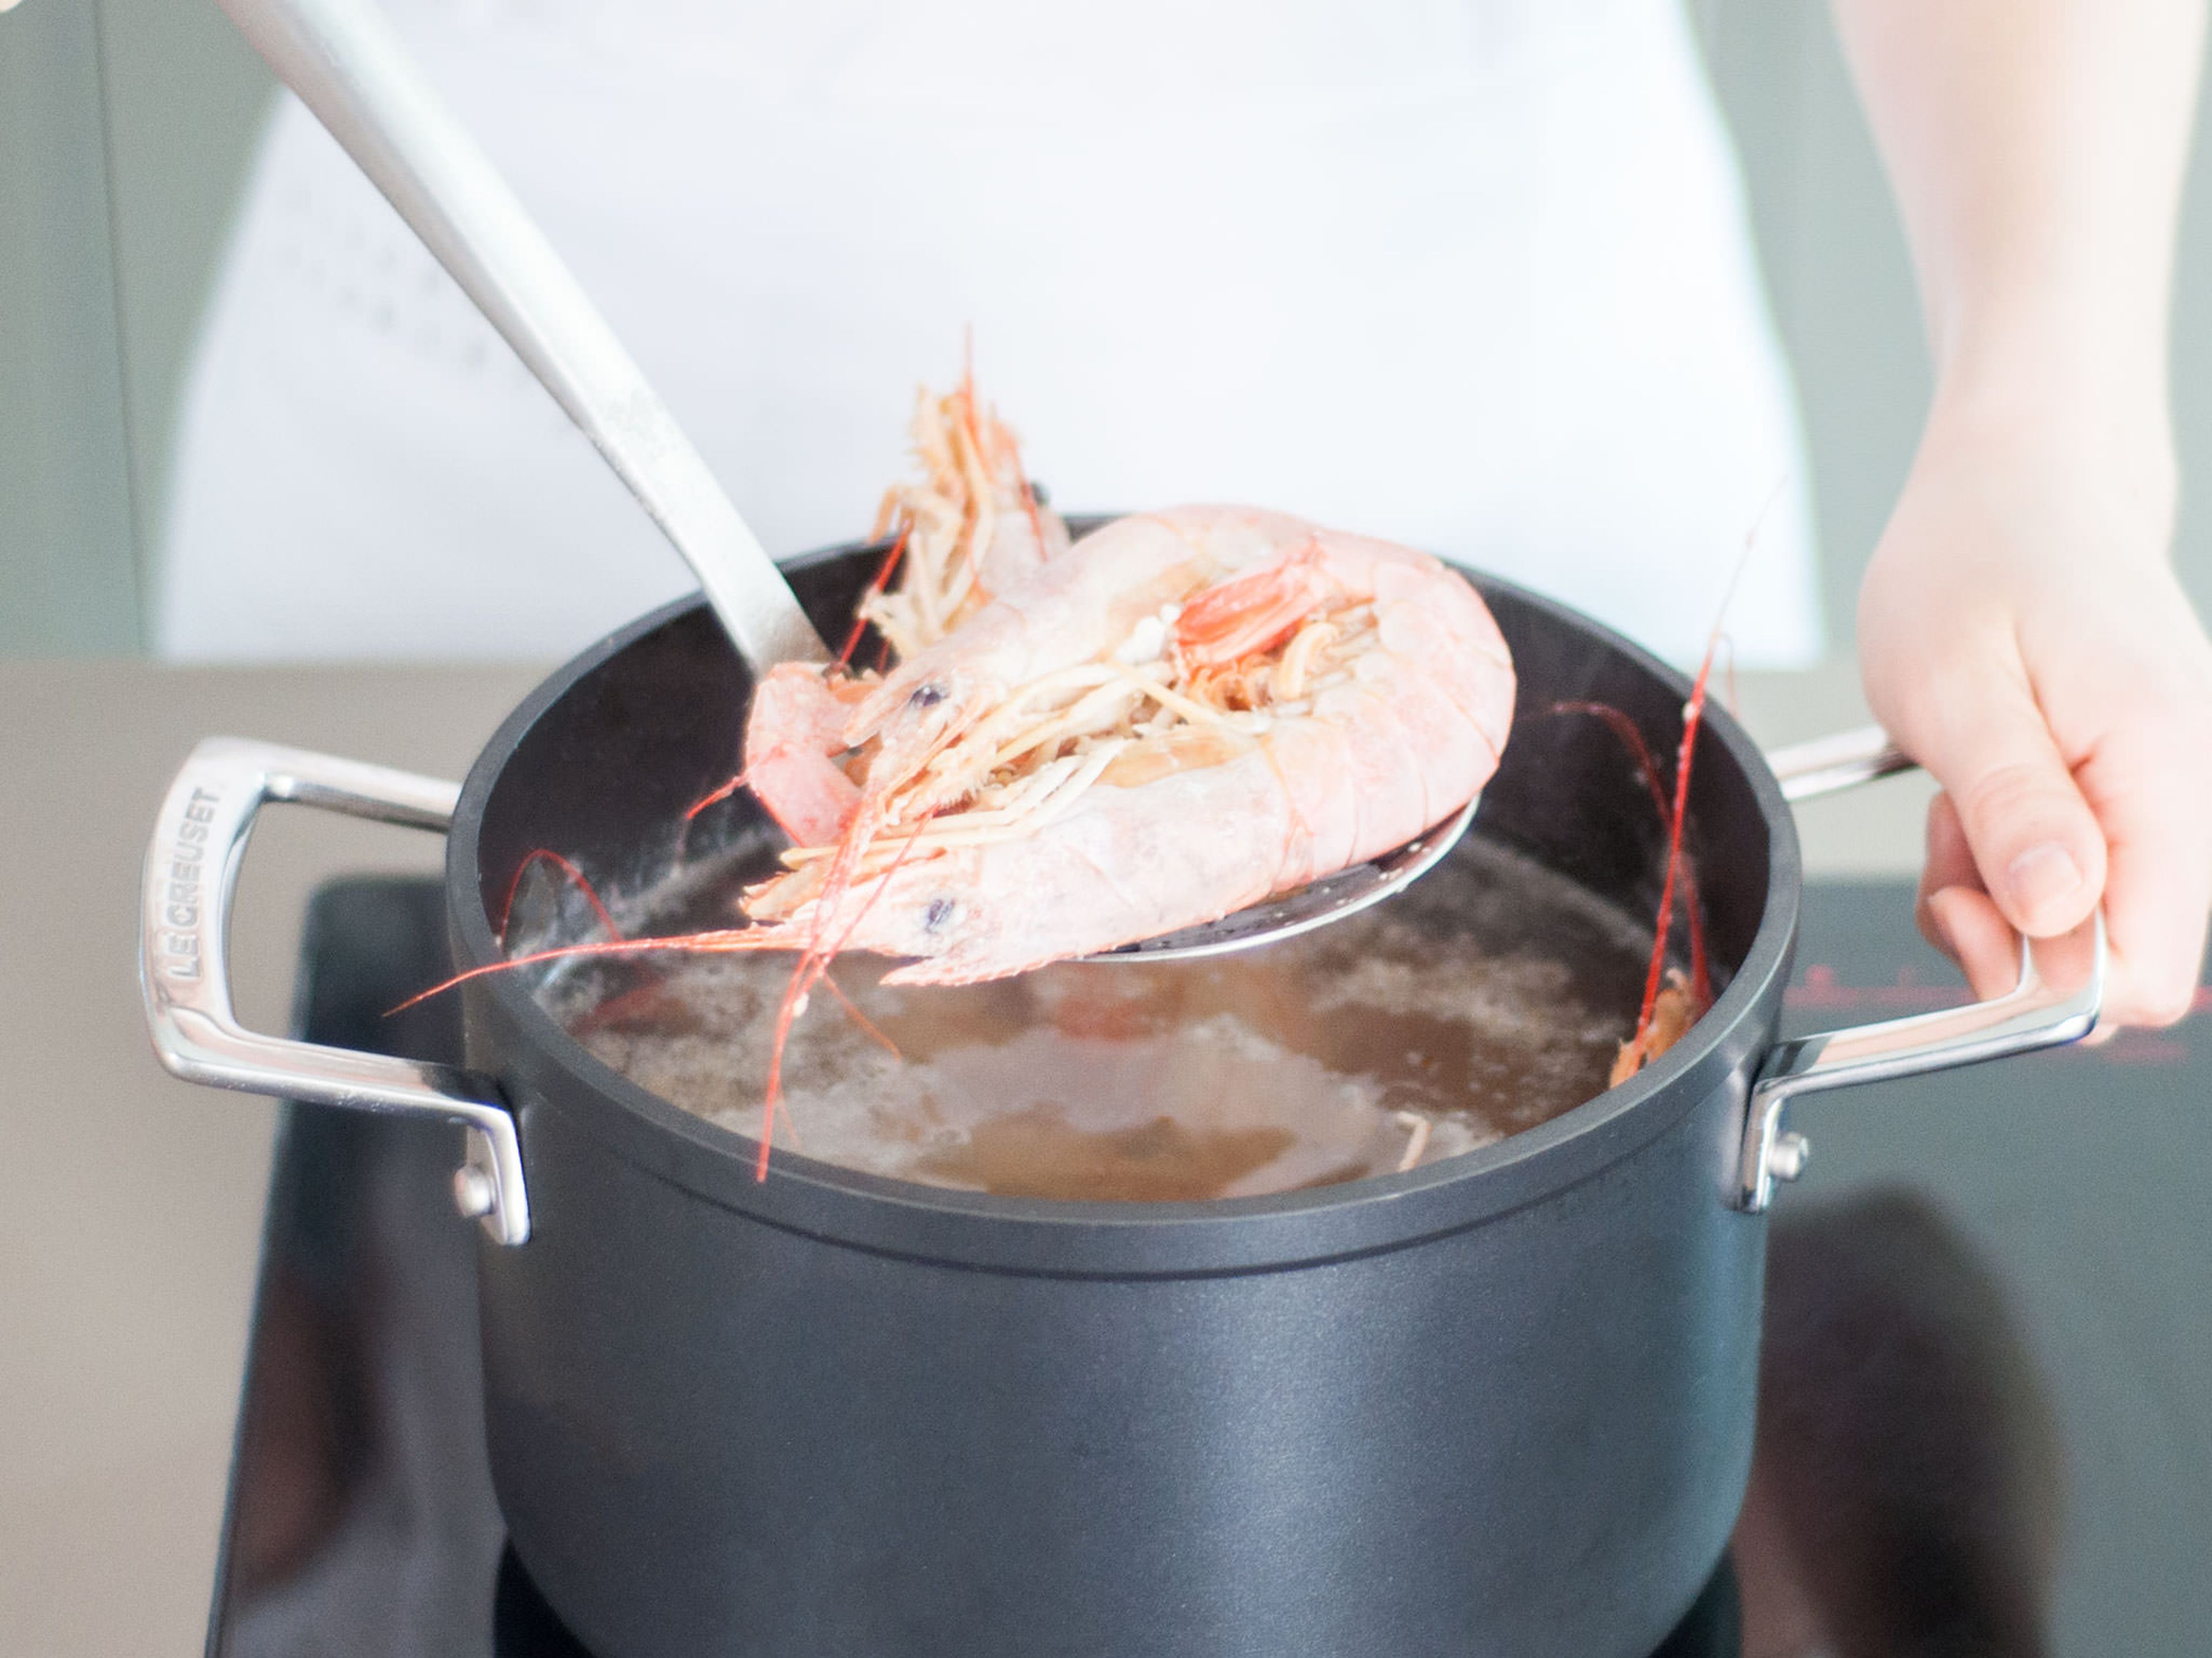 Bring a large pot of water to a boil; add wine if using. Add shrimp and cook until they turn white, approx. 2 min. Drain and set aside.